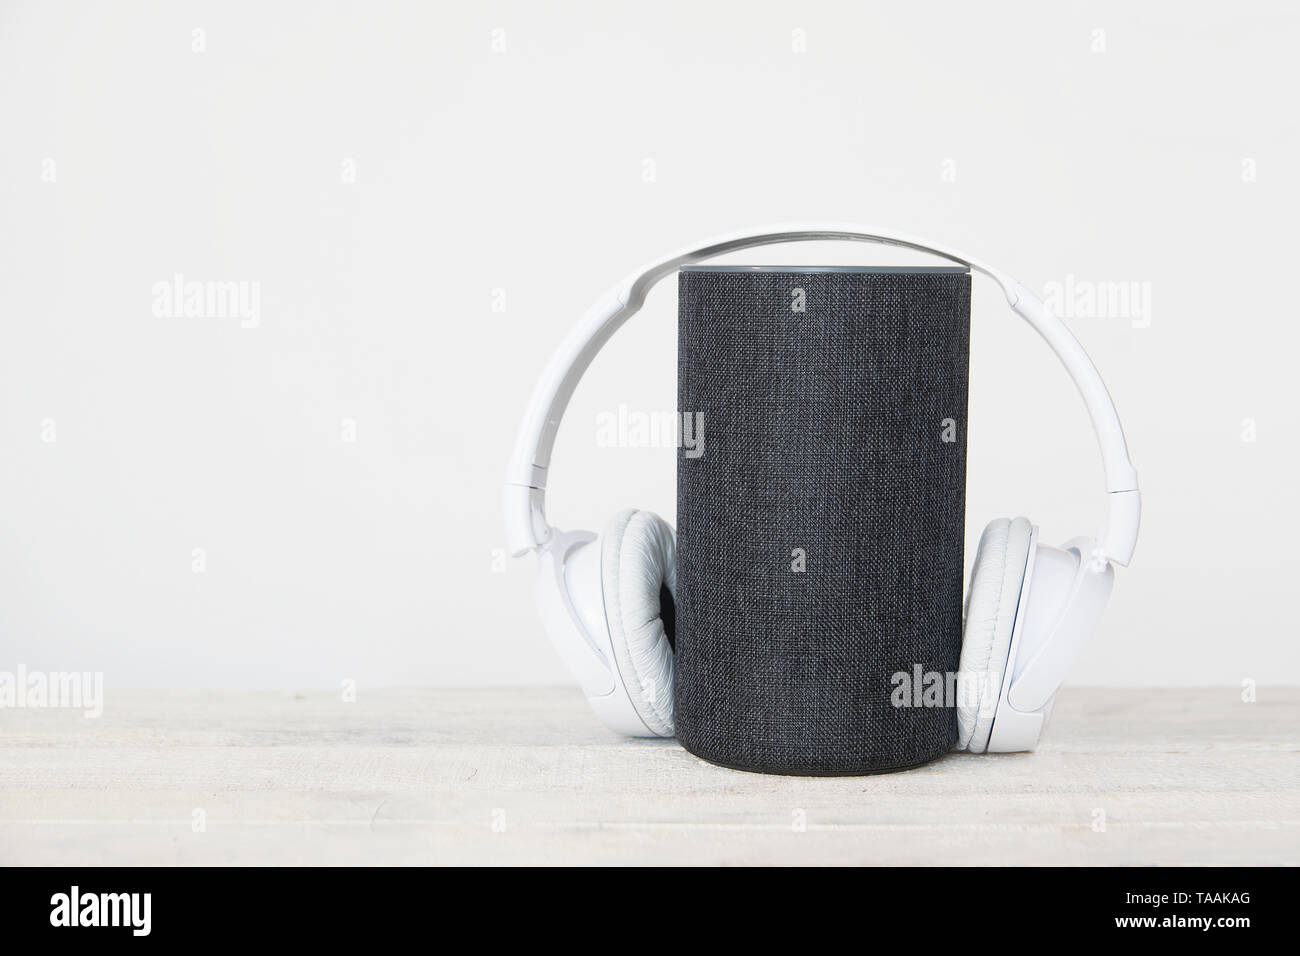 Smart speaker device and hearphones against a white background. Empty copy space for Editor's text Stock Photo